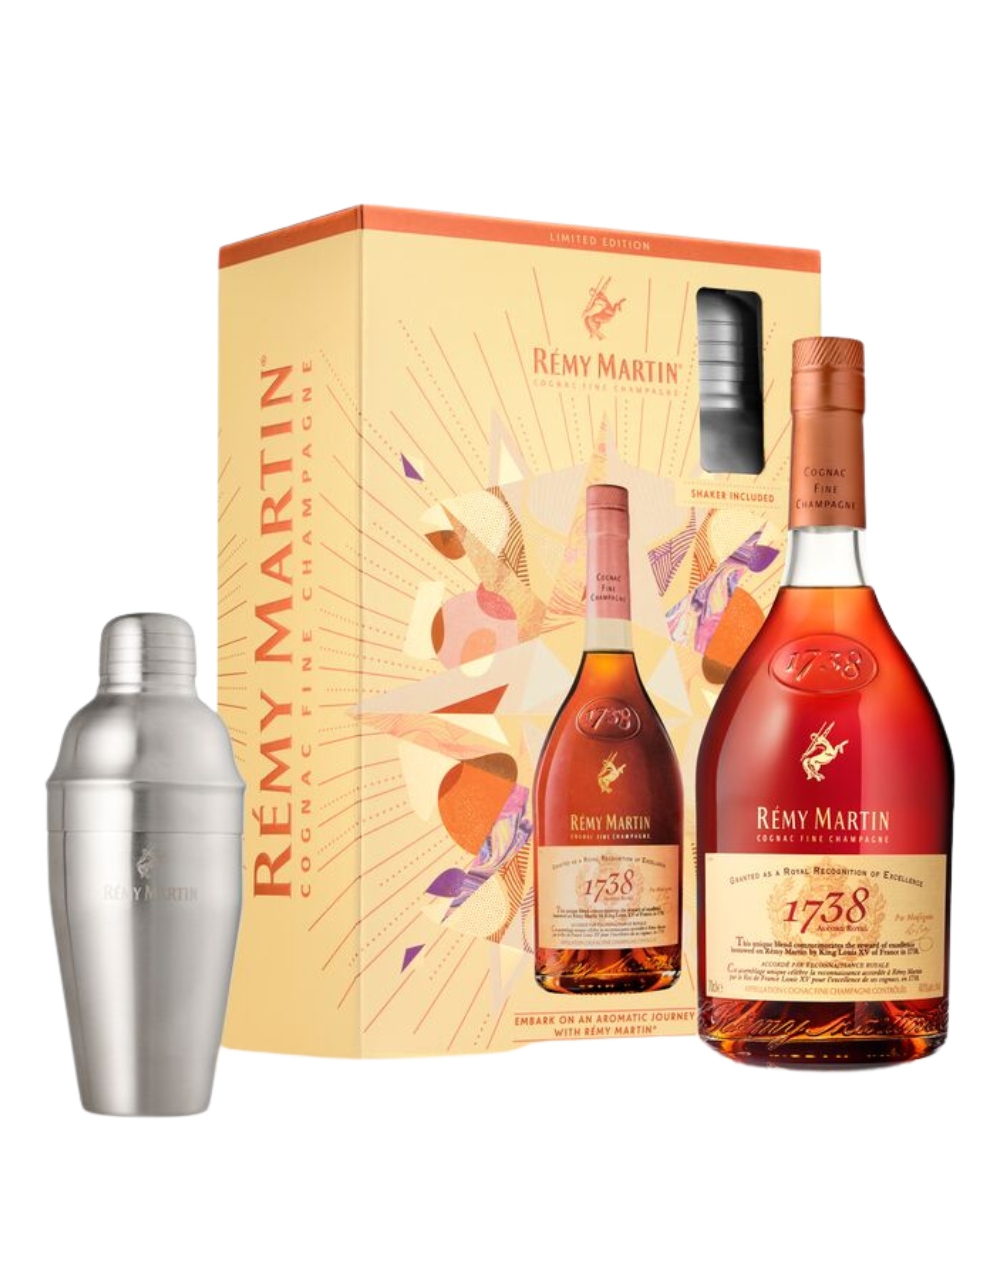 Remy Martin XO Excellence-Special Fine Champagne Cognac 750ml